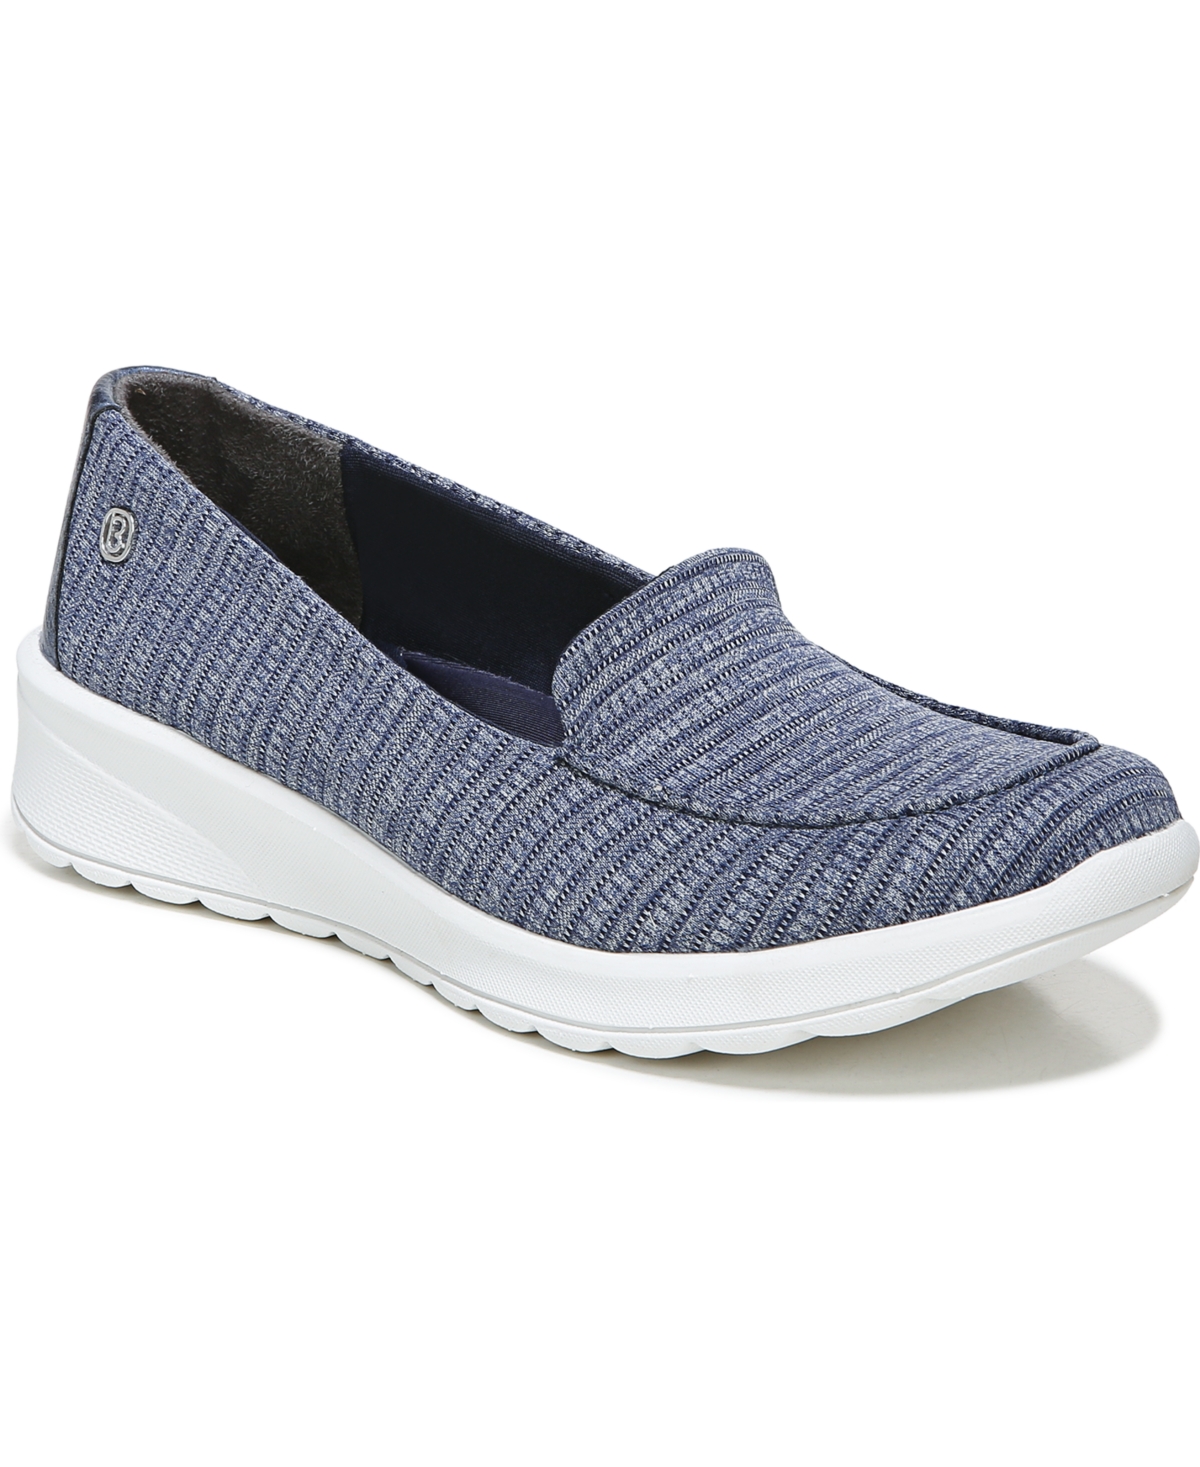 BZees Get Movin' Washable Slip-on Flats Women's Shoes